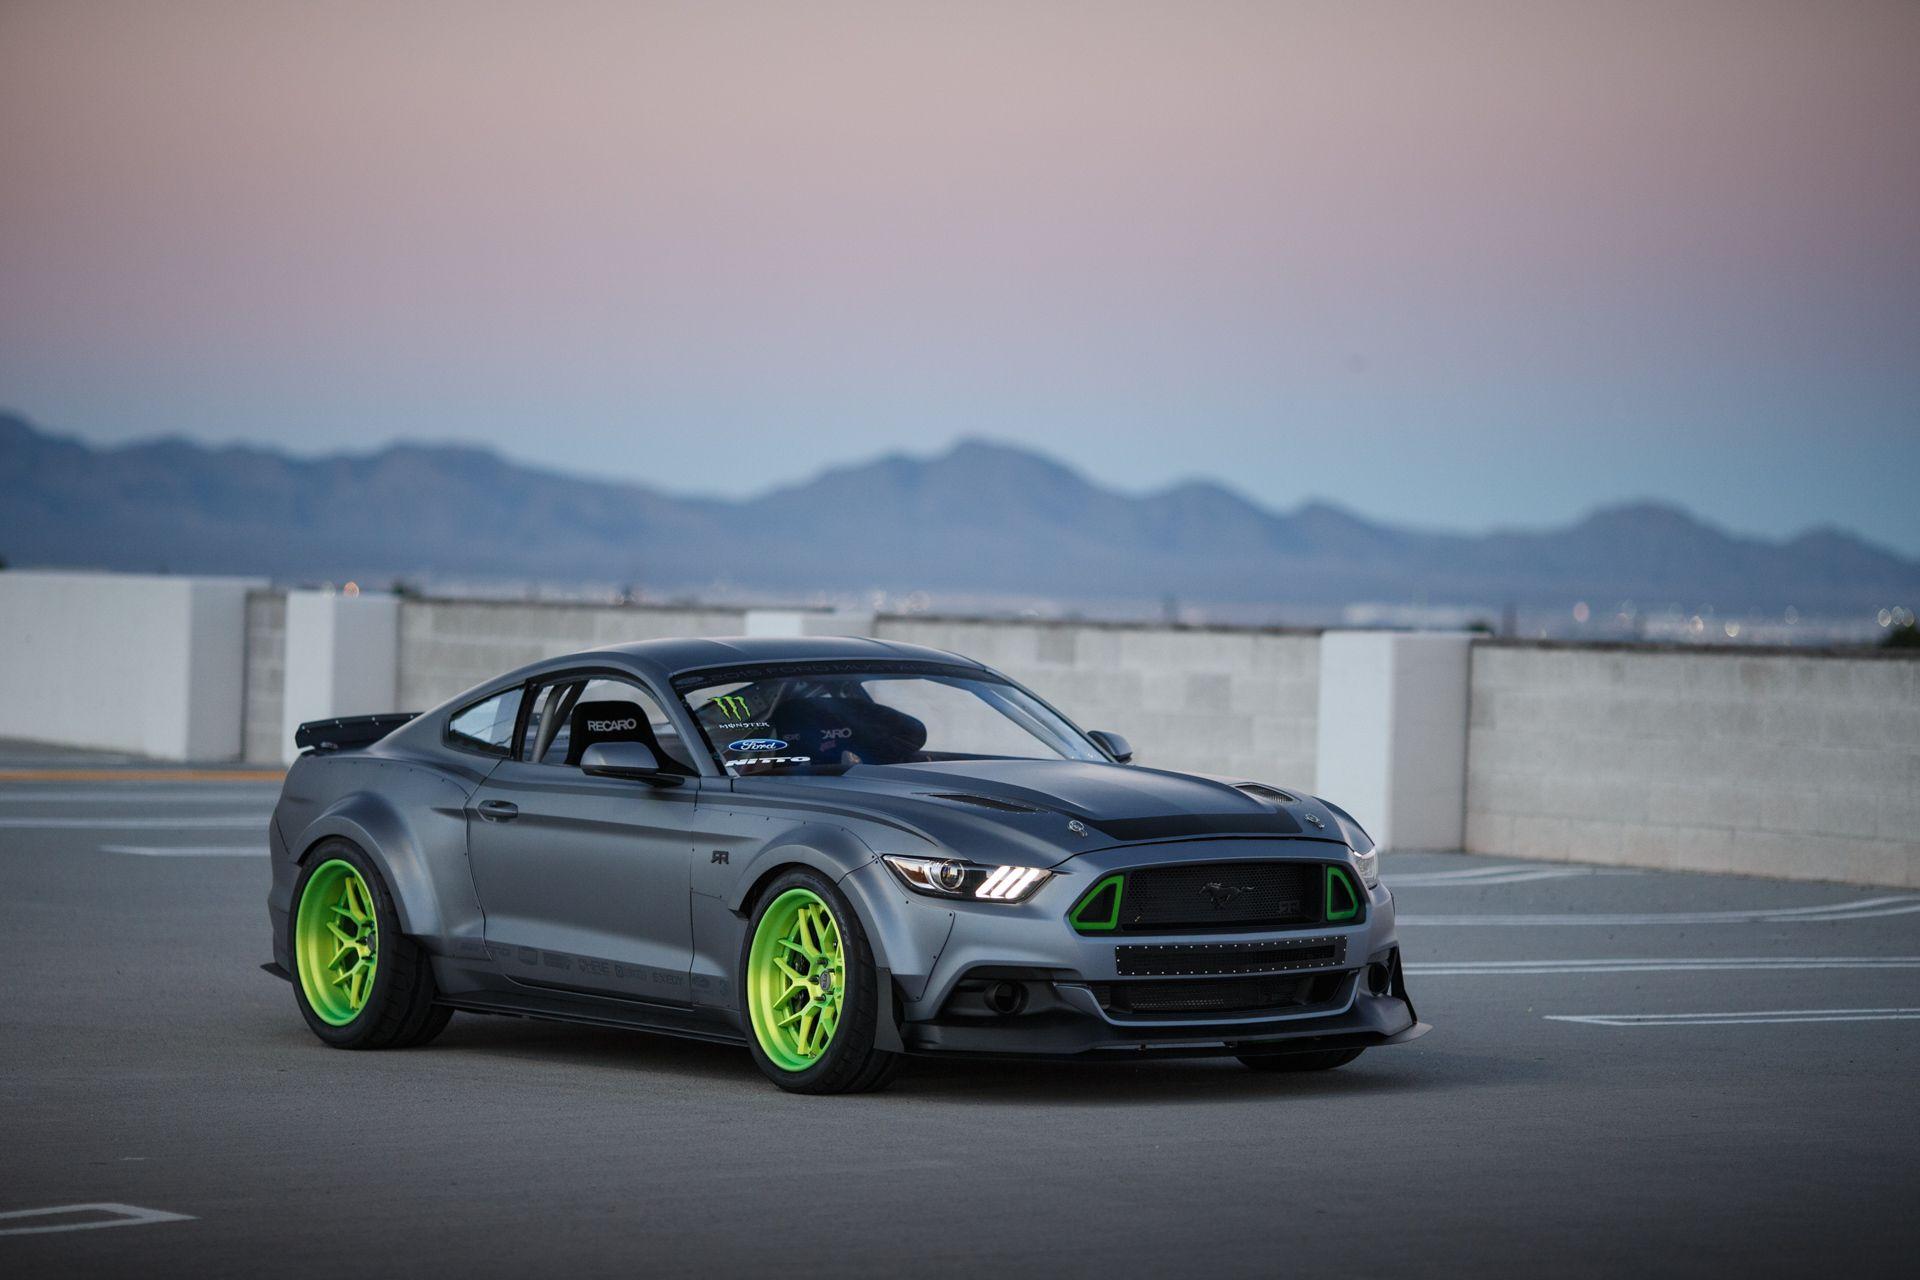 Wallpaper ford, mustang, rtr, green, wheels, front, monster